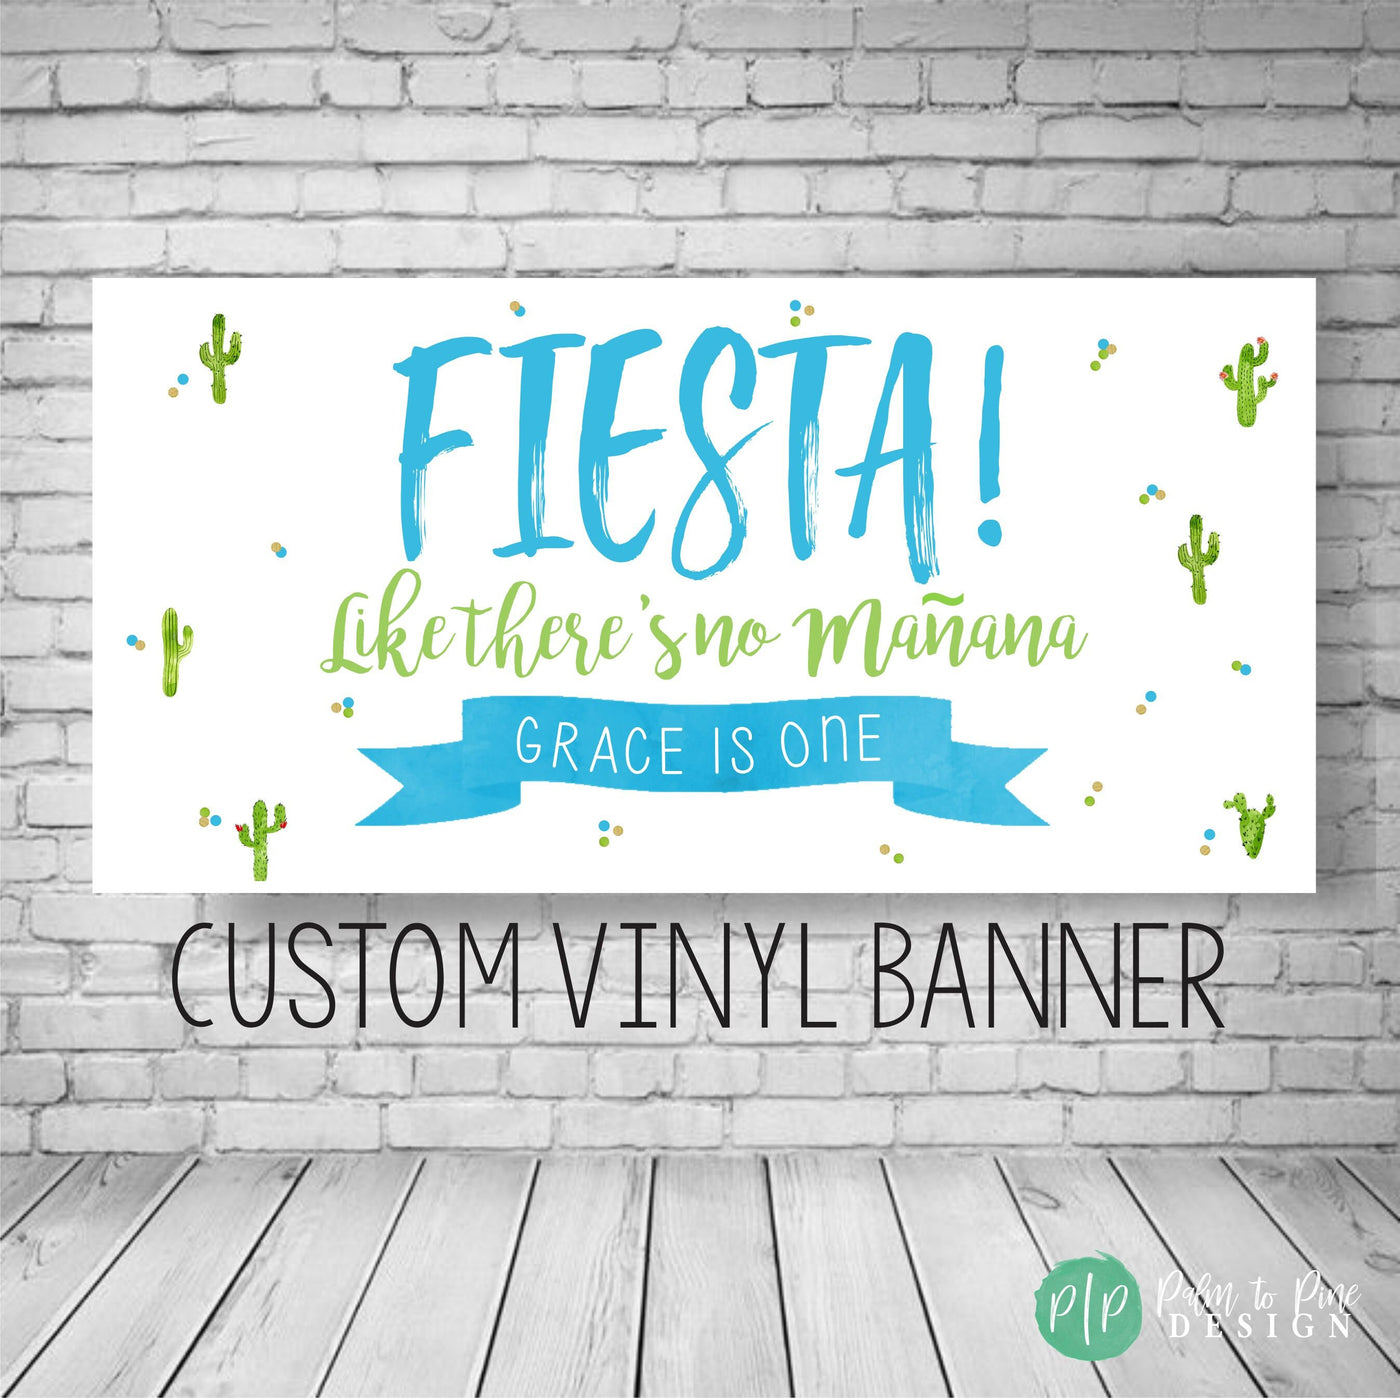 Fiesta Birthday Banner, Taco Bout a Party Decor, Fiesta Birthday Party, Fiesta Like there's no manana, Cactus Birthday Banner, Cactus Banner